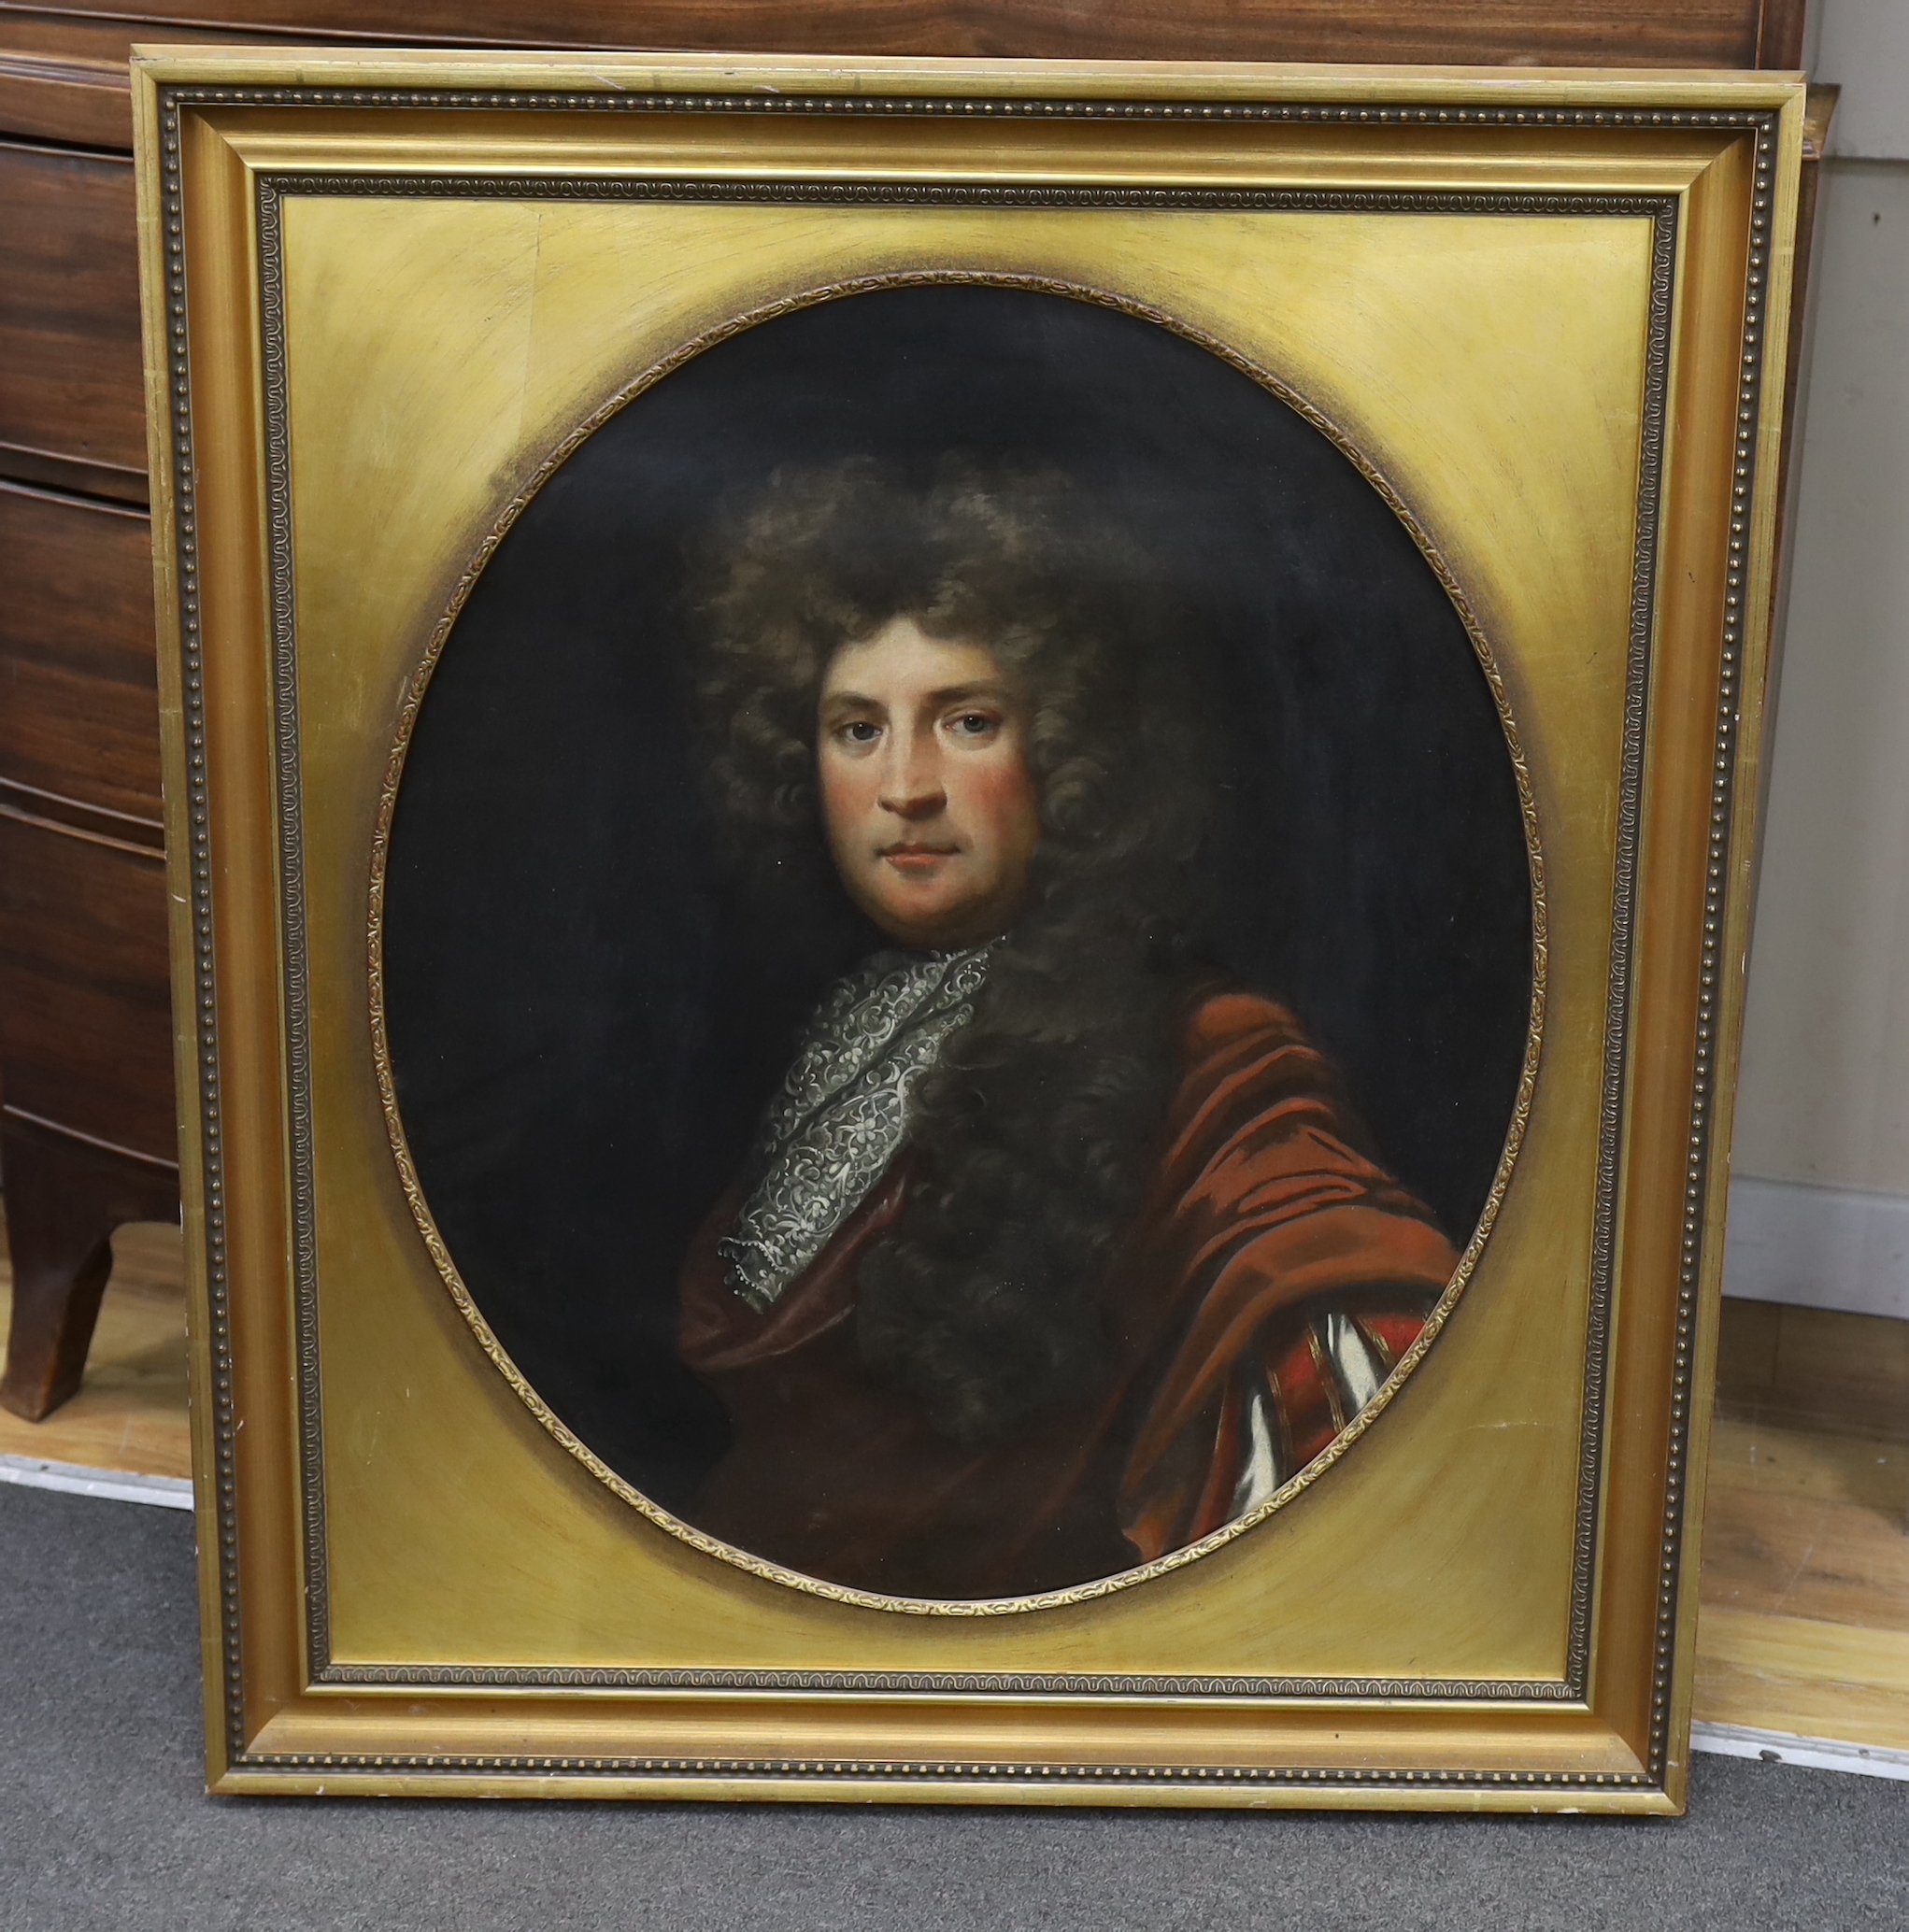 English School, oil on canvas, Portrait of an early 18th century gentleman wearing a wig and lace cravat, oval, 73 x 62cm, gilt frame